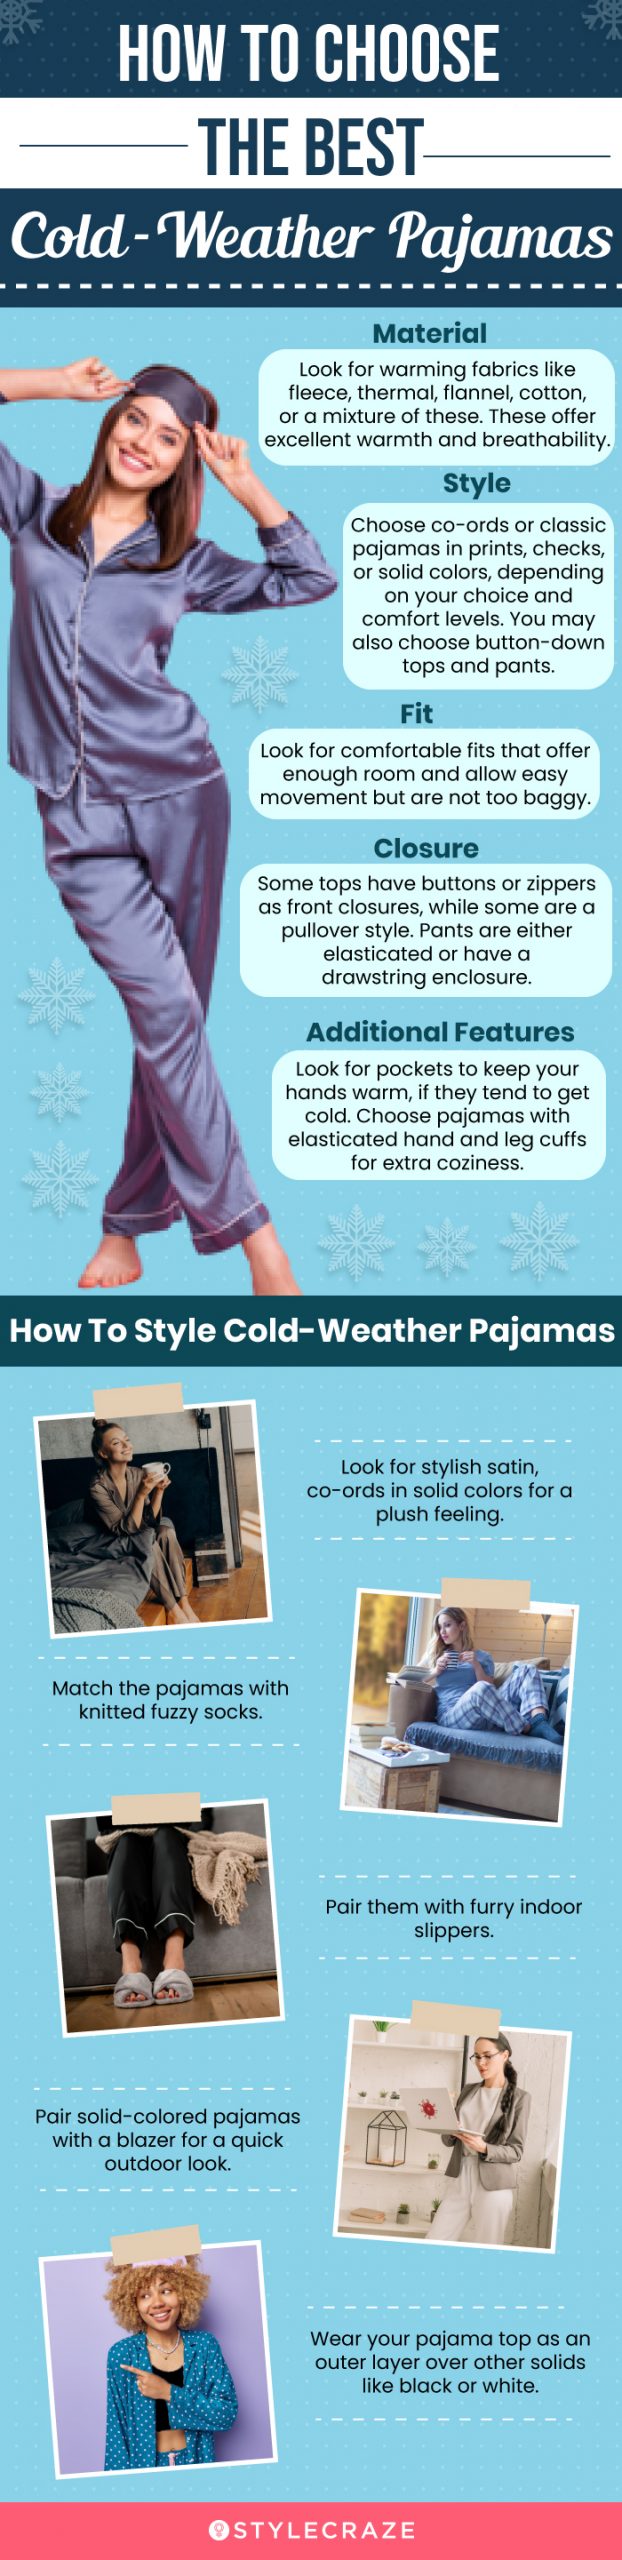 How To Choose The Best Cold-Weather Pajamas (infographic)